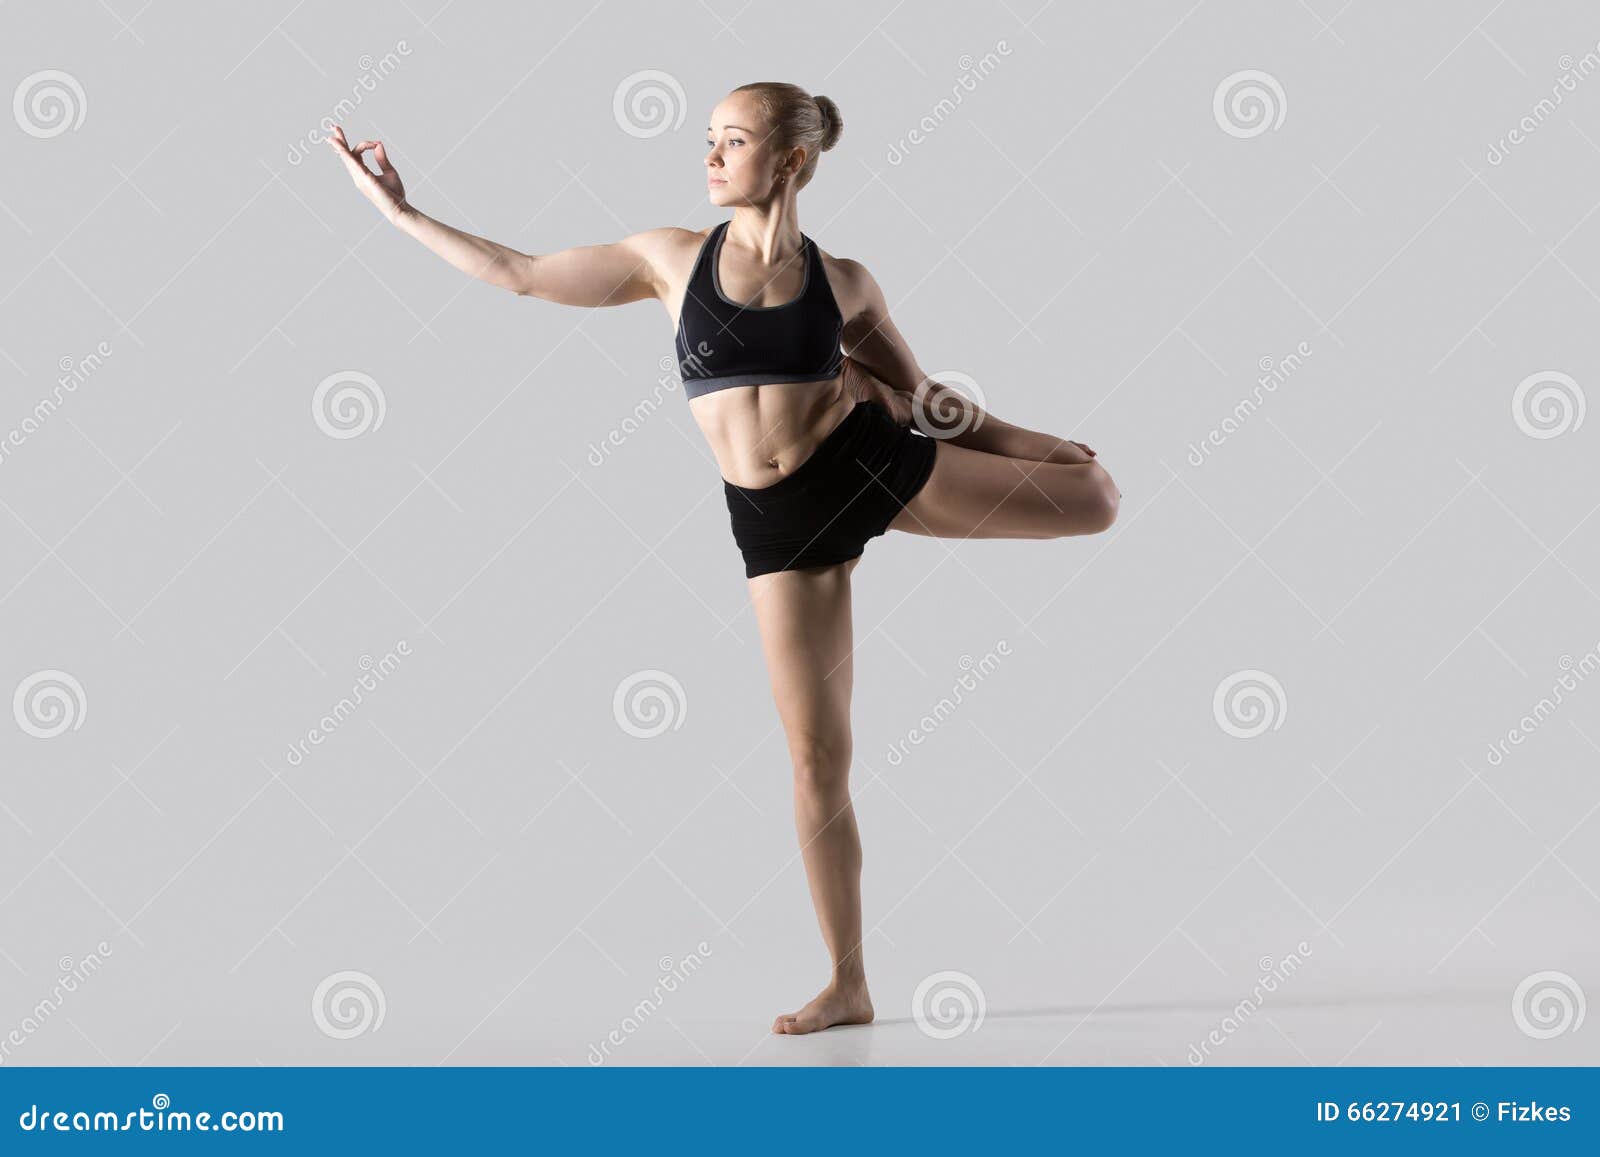 Full Lord Dance Pose Yoga Workout Stock Vector (Royalty Free) 1925409785 |  Shutterstock